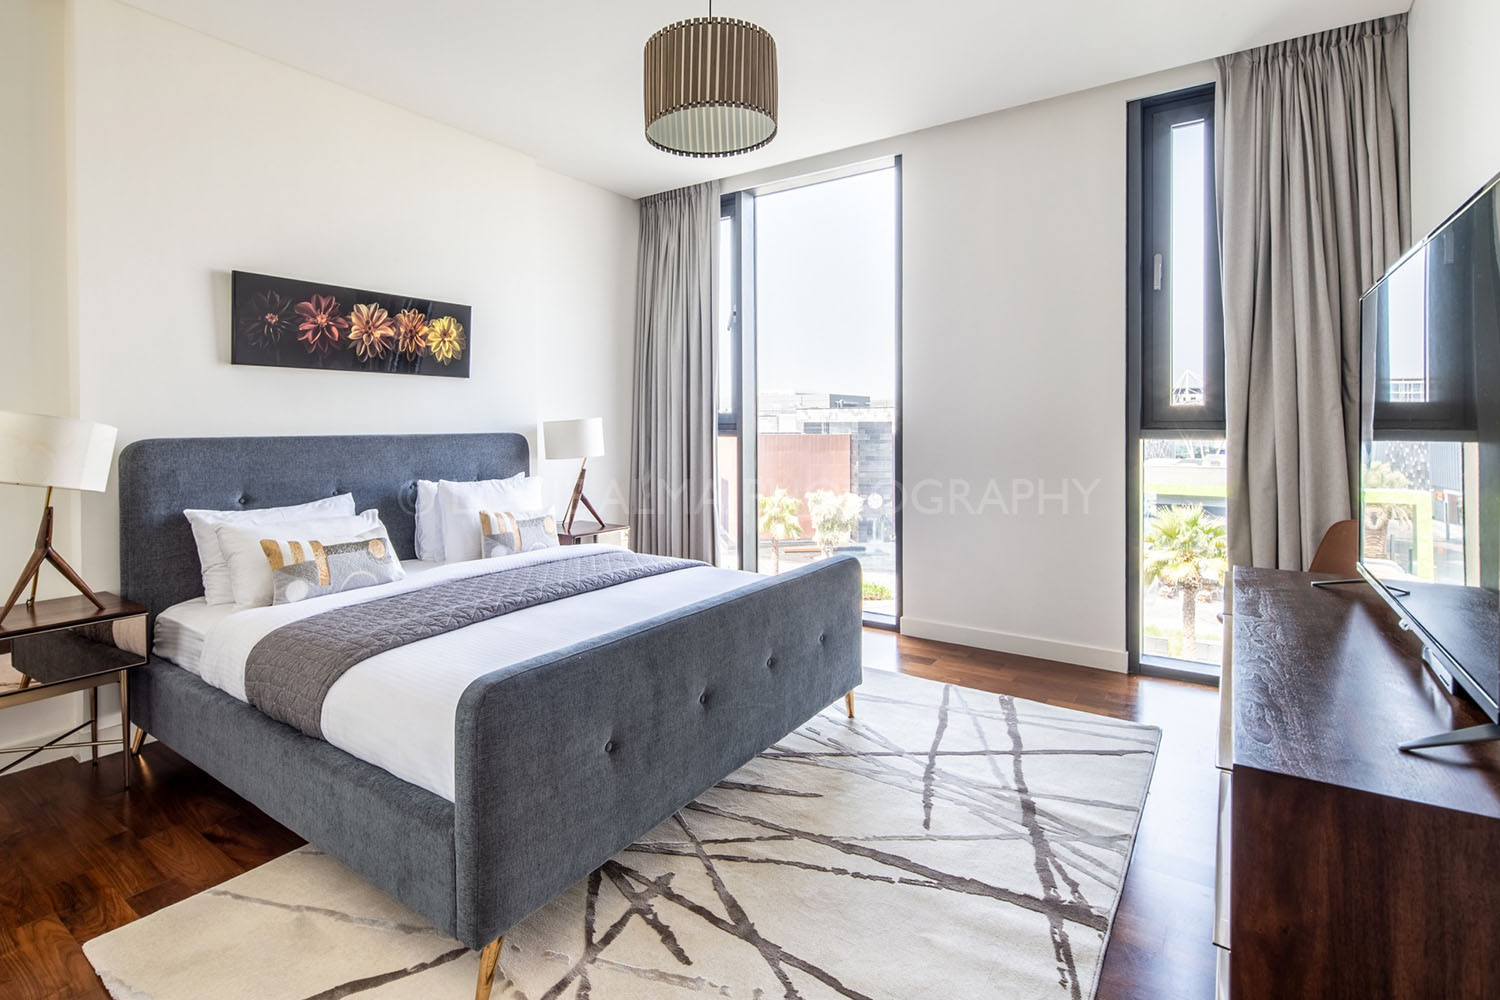 Real Estate Photography - Elegant and Classy Apartment in Citywalk, Dubai